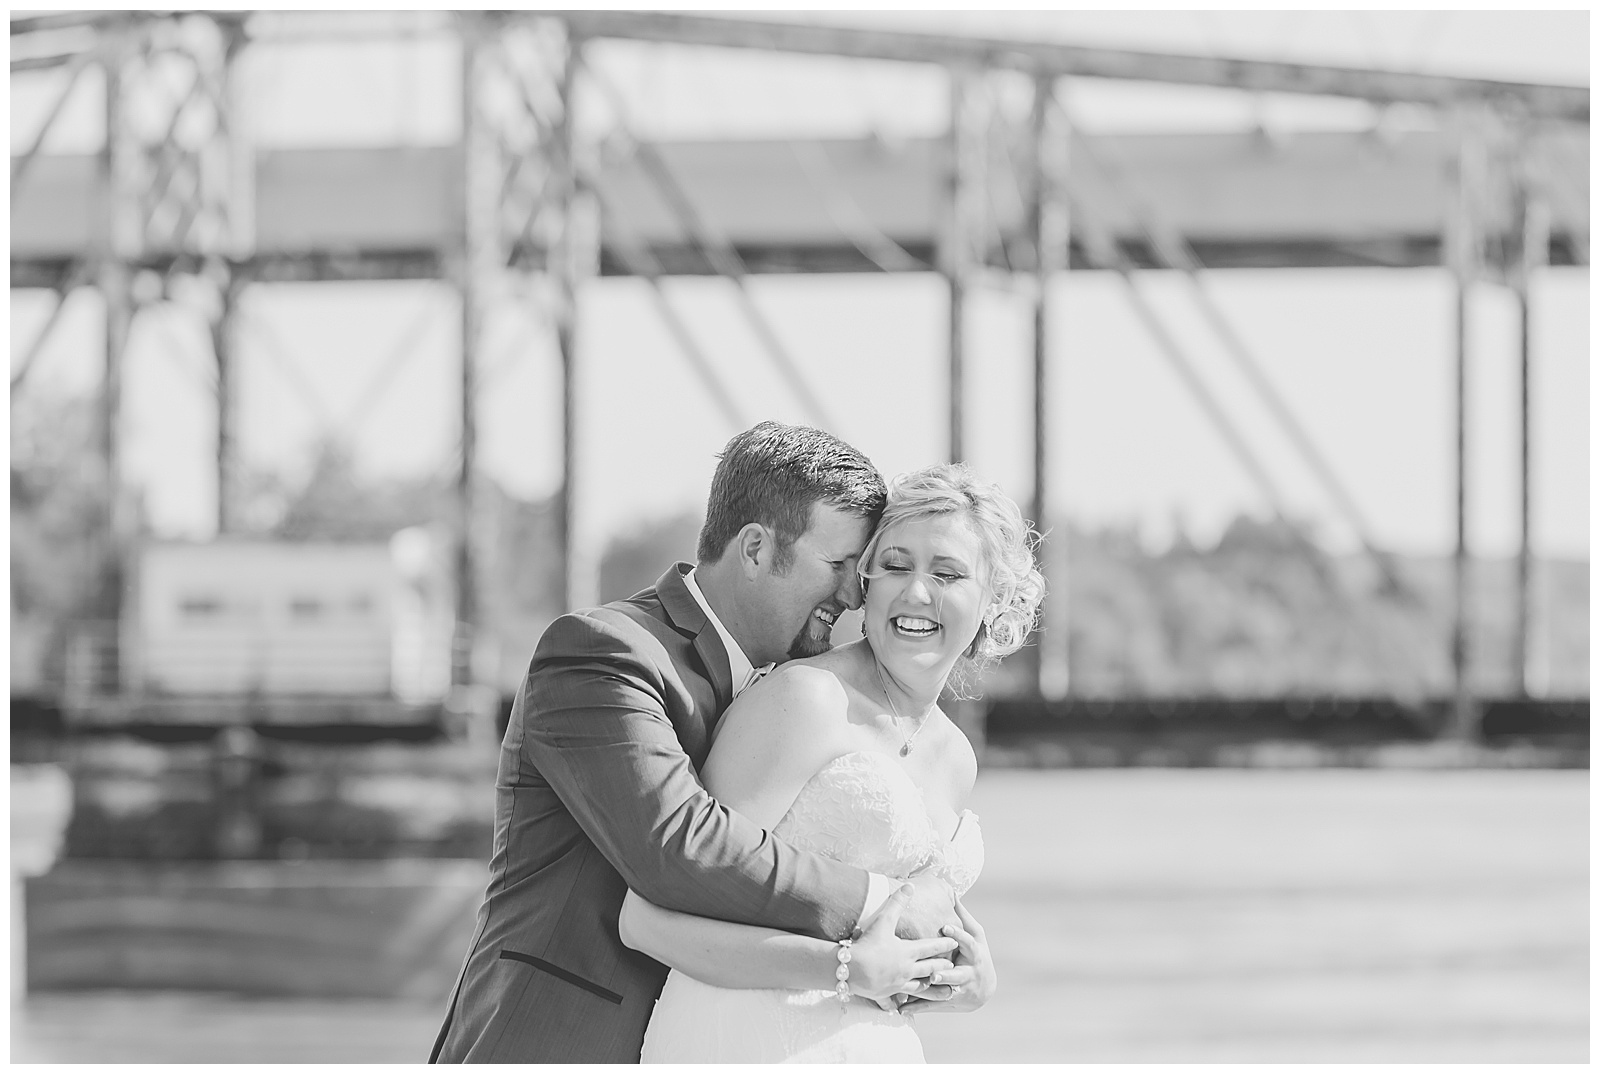 Wedding photography in Atchison, Kansas, by Kansas City wedding photographers Wisdom-Watson Weddings.